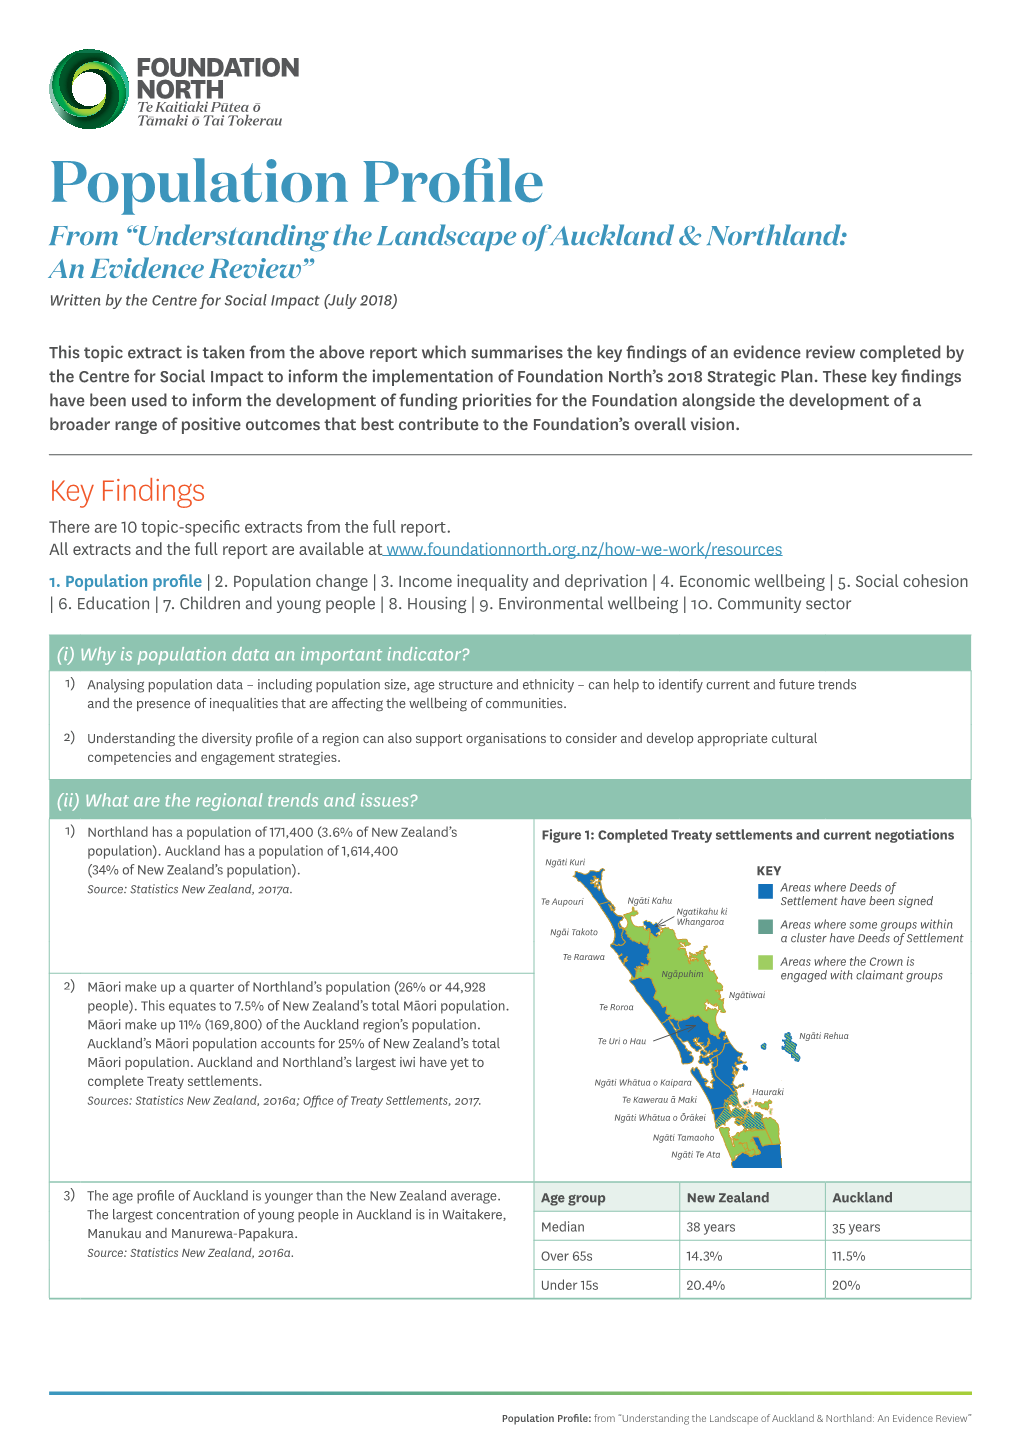 Population Profile from “Understanding the Landscape of Auckland & Northland: an Evidence Review” Written by the Centre for Social Impact (July 2018)